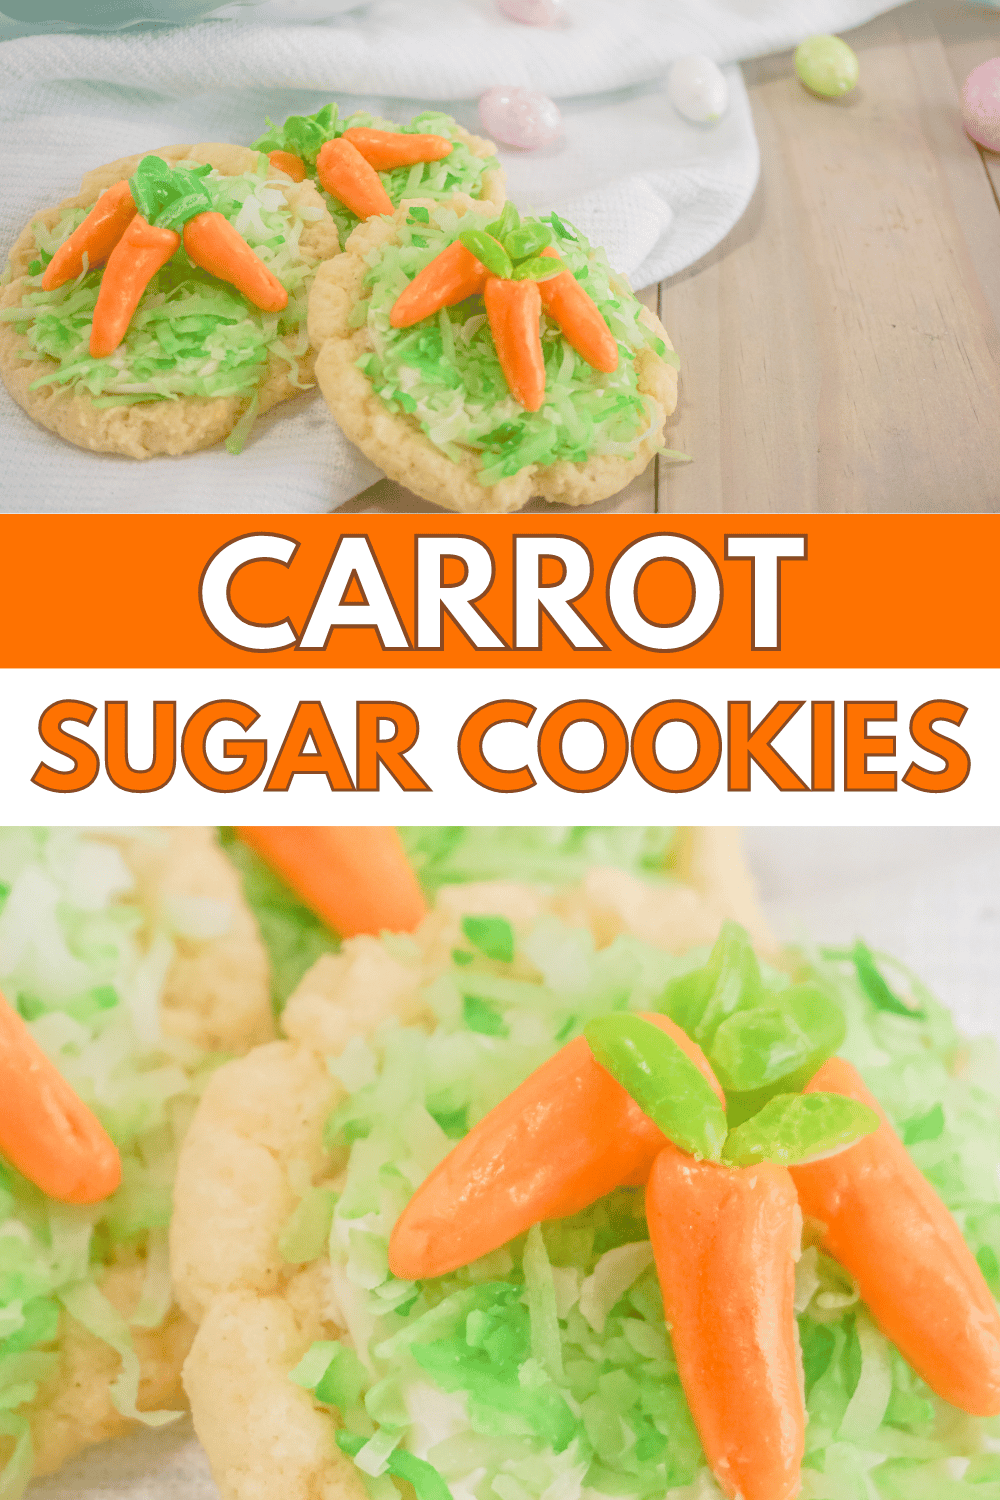 These Carrot Sugar Cookies are soft, chewy, and beautifully decorated. They are a festive, yet easy Easter dessert. #carrotsugarcookies #eastercookies #sugarcookies #easterdessert #cookierecipe via @wondermomwannab